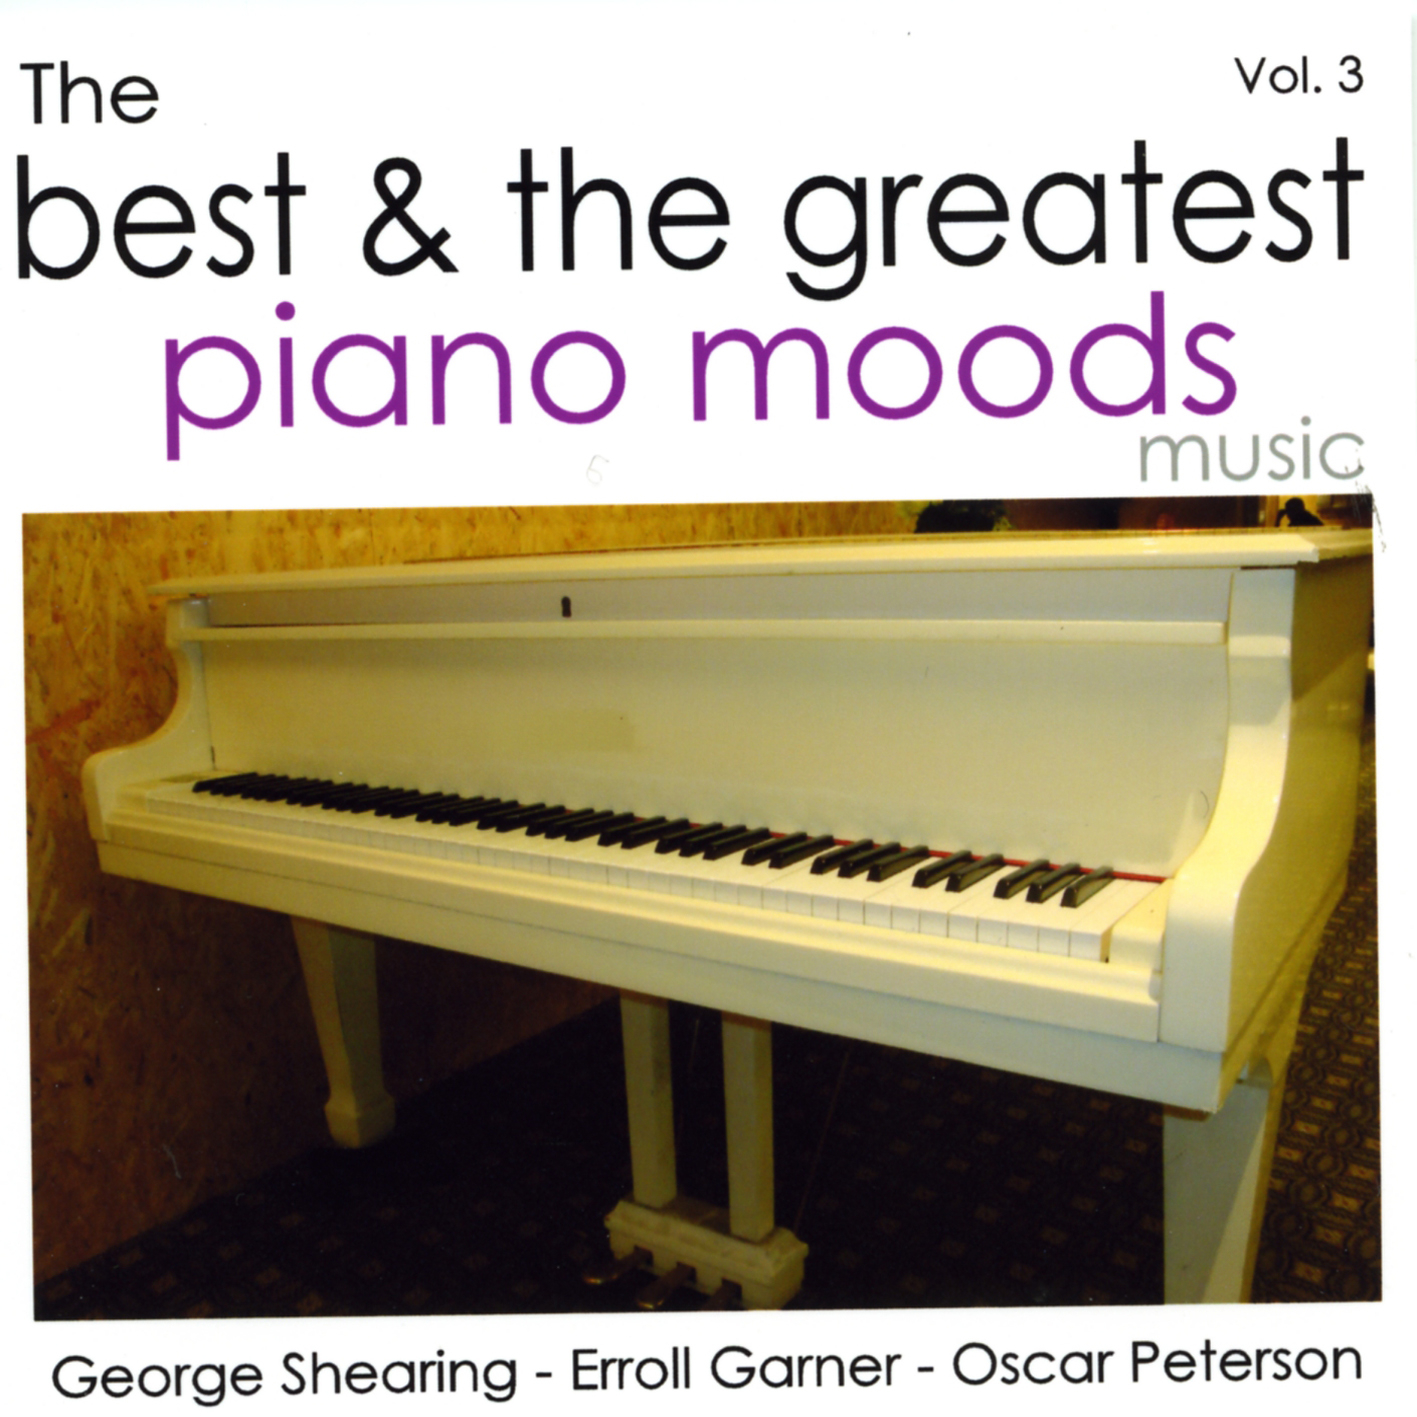 The Best & The Greatest Piano Moods - Vol.3